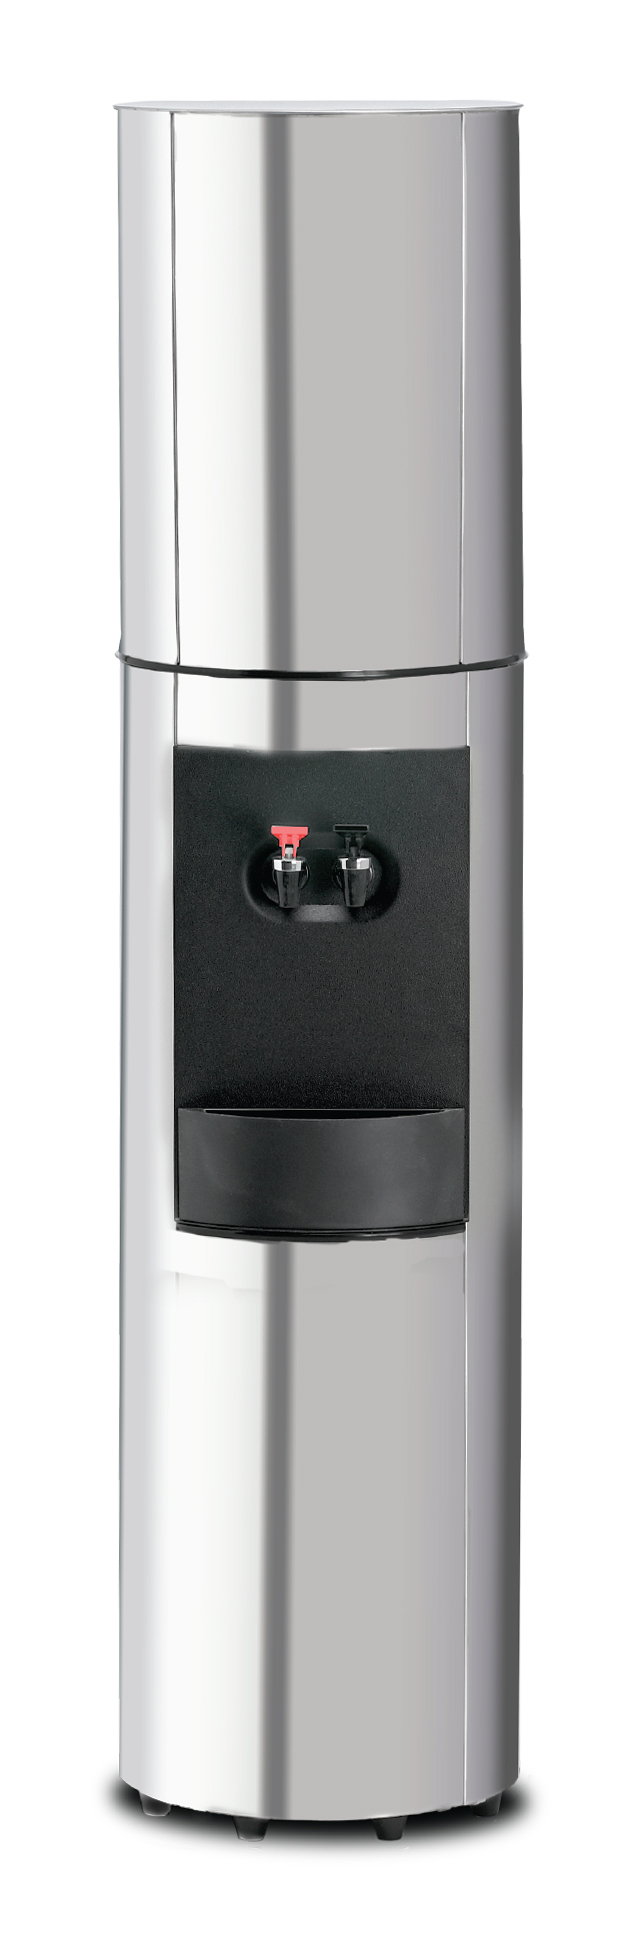 S2 Stainless Steel Water Cooler with Hot & Cold Water